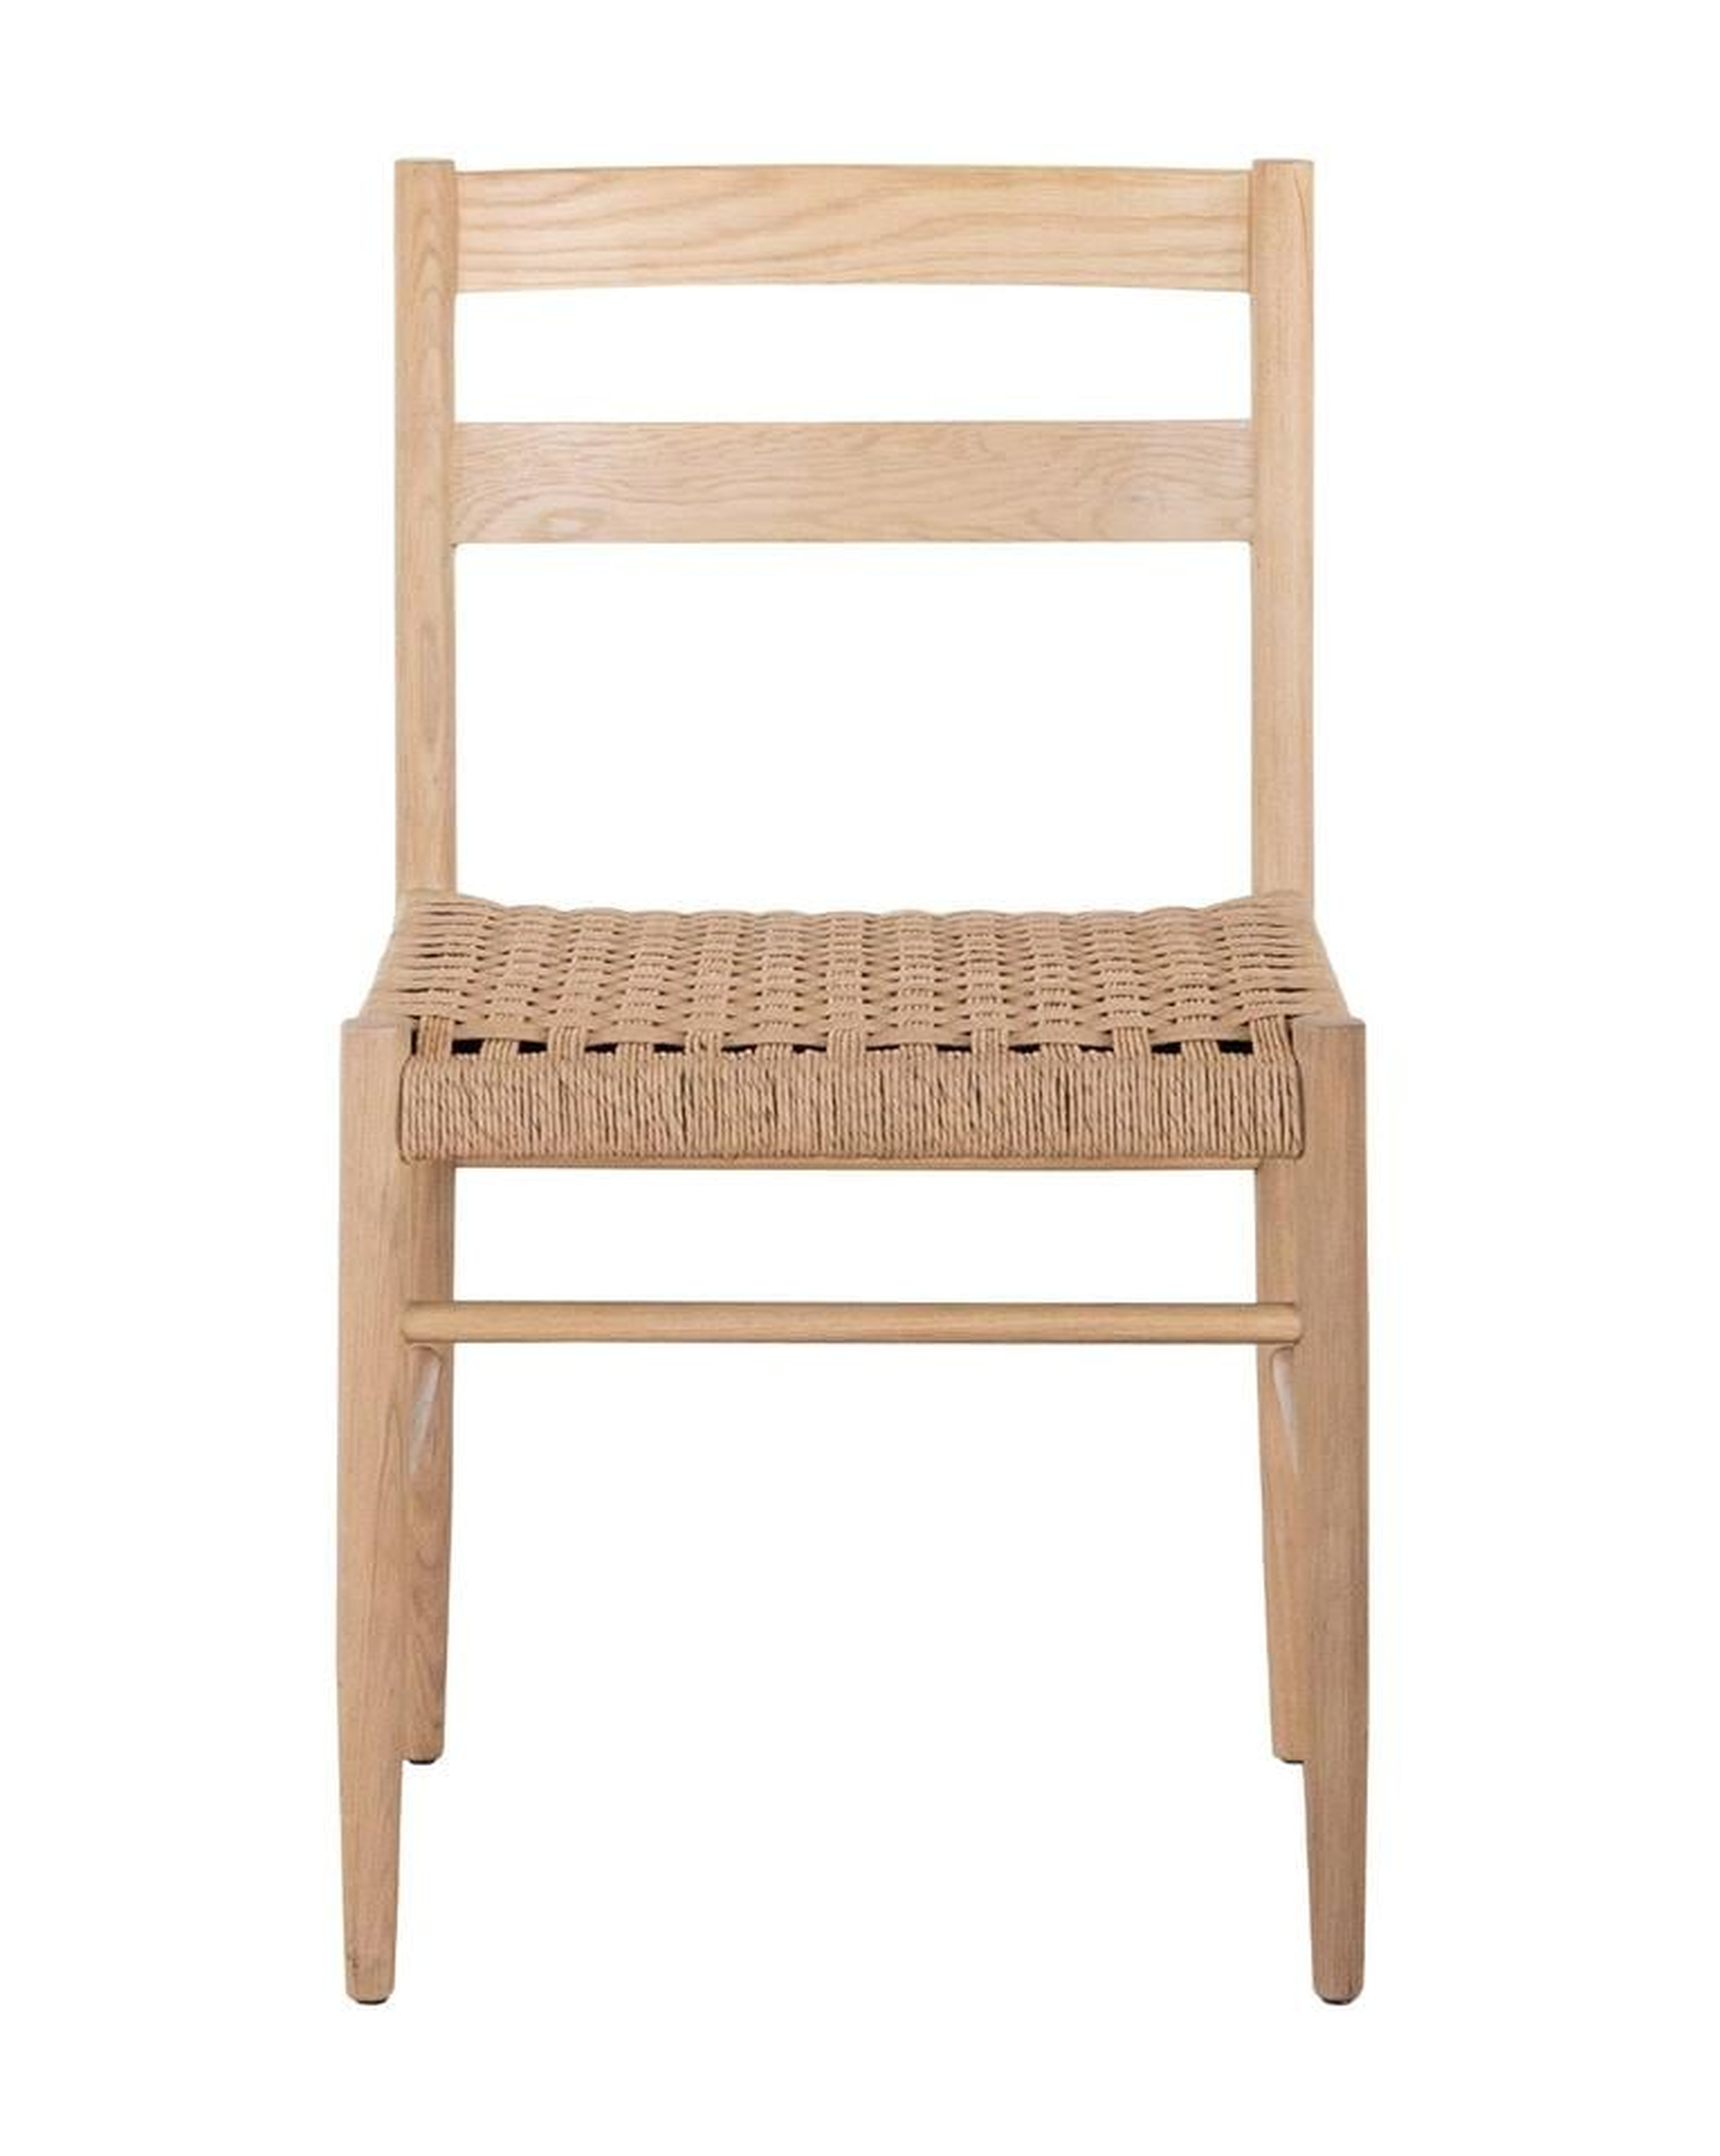 ELOISE WOVEN DINING CHAIR - McGee & Co.